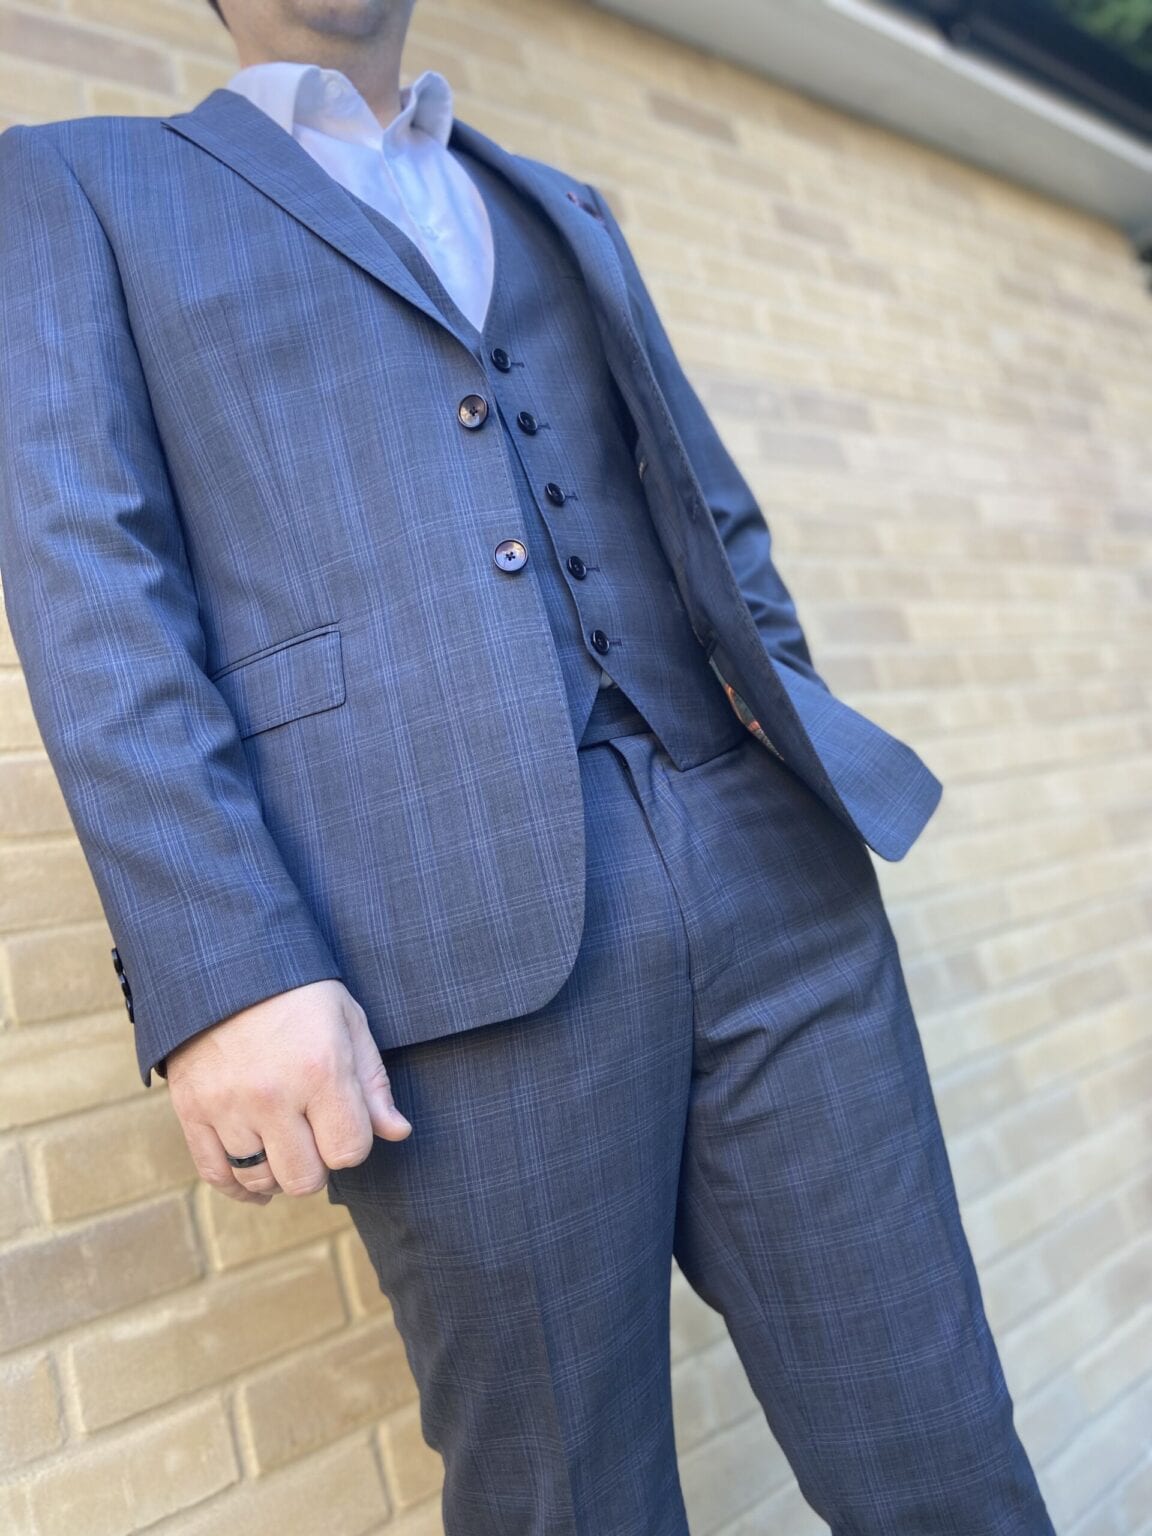 Ted Baker Suit - The Travelling Salesman Fashion